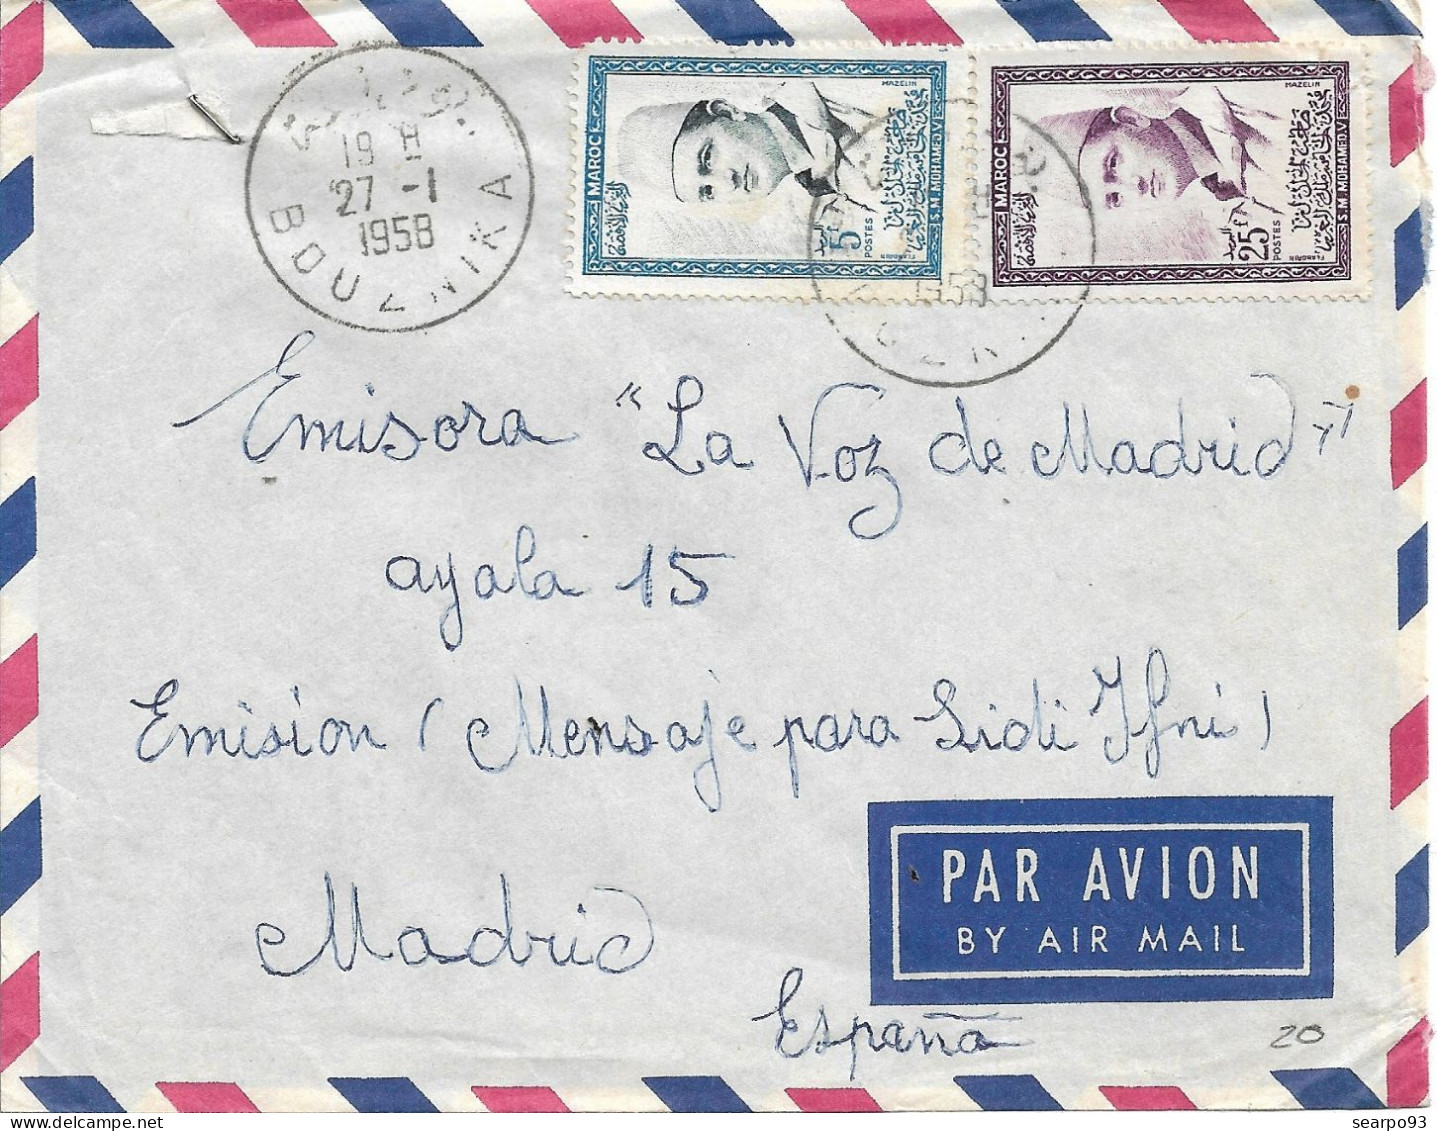 MOROCCO. COVER FROM BOUZNIKA TO MADRID. 1958. AIR MAIL - Marocco (1956-...)